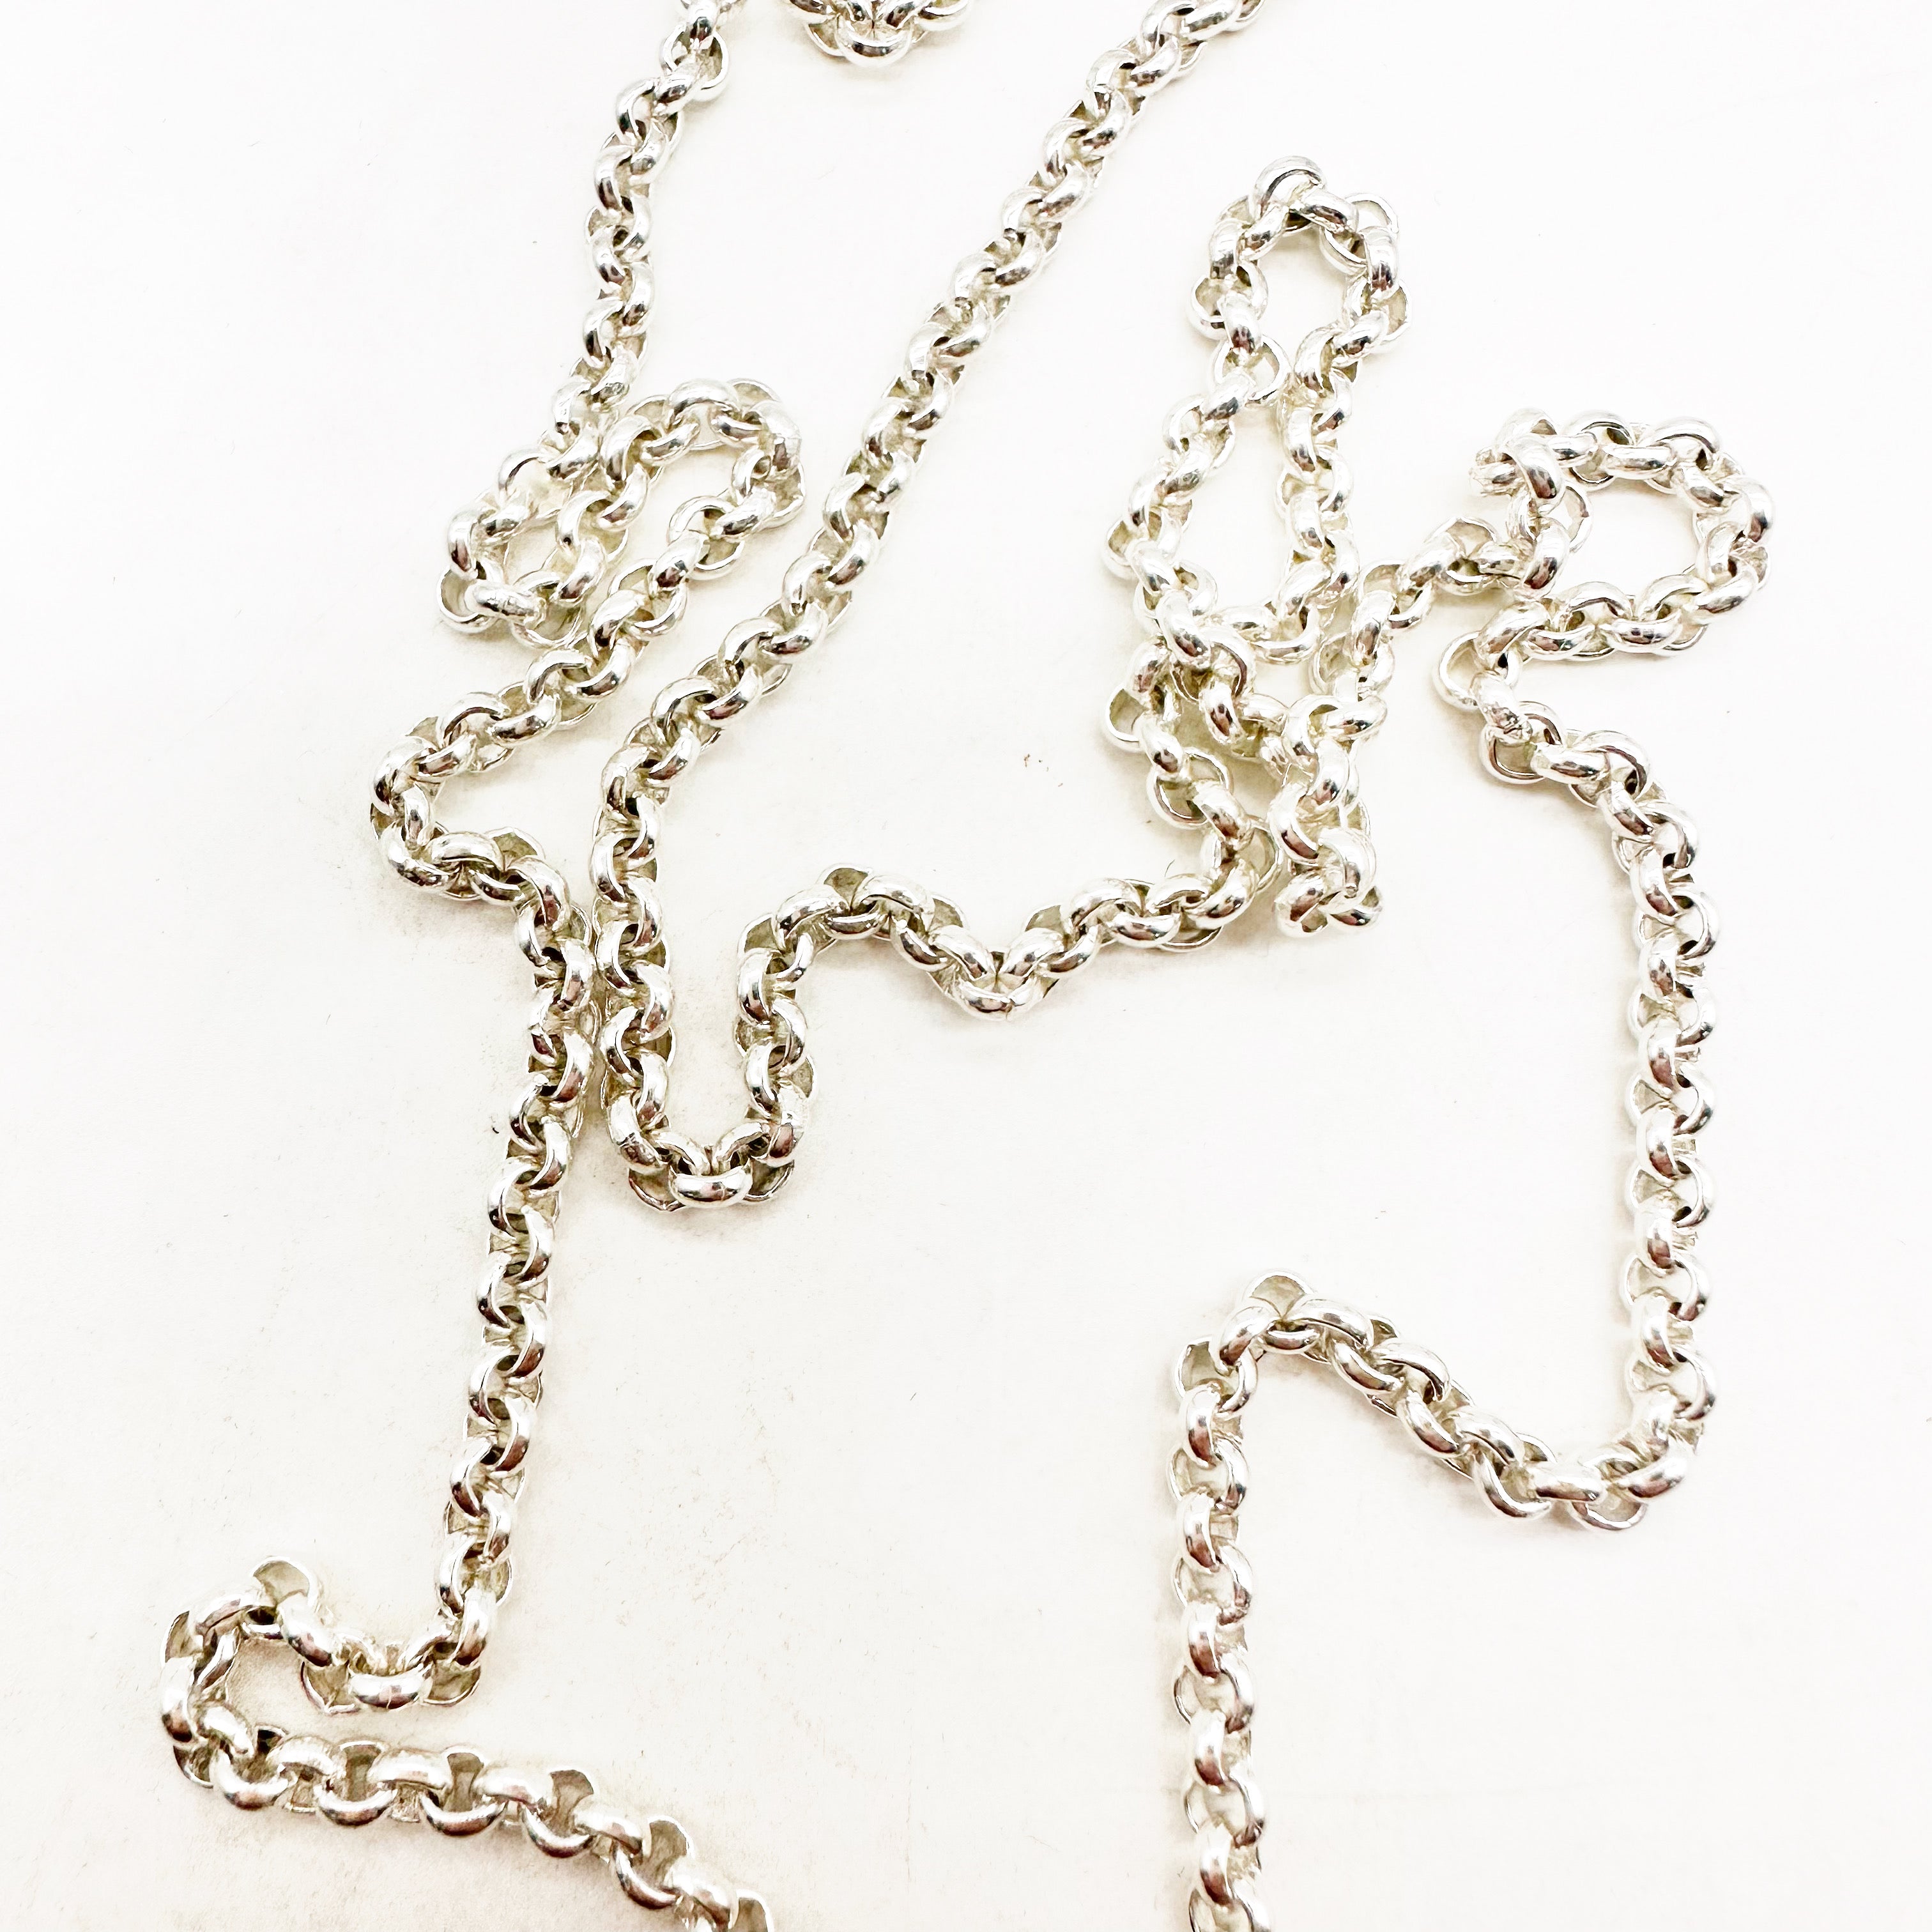 SILVER ROLO CHAIN WITH 14K GOLD CHARM HOLDER